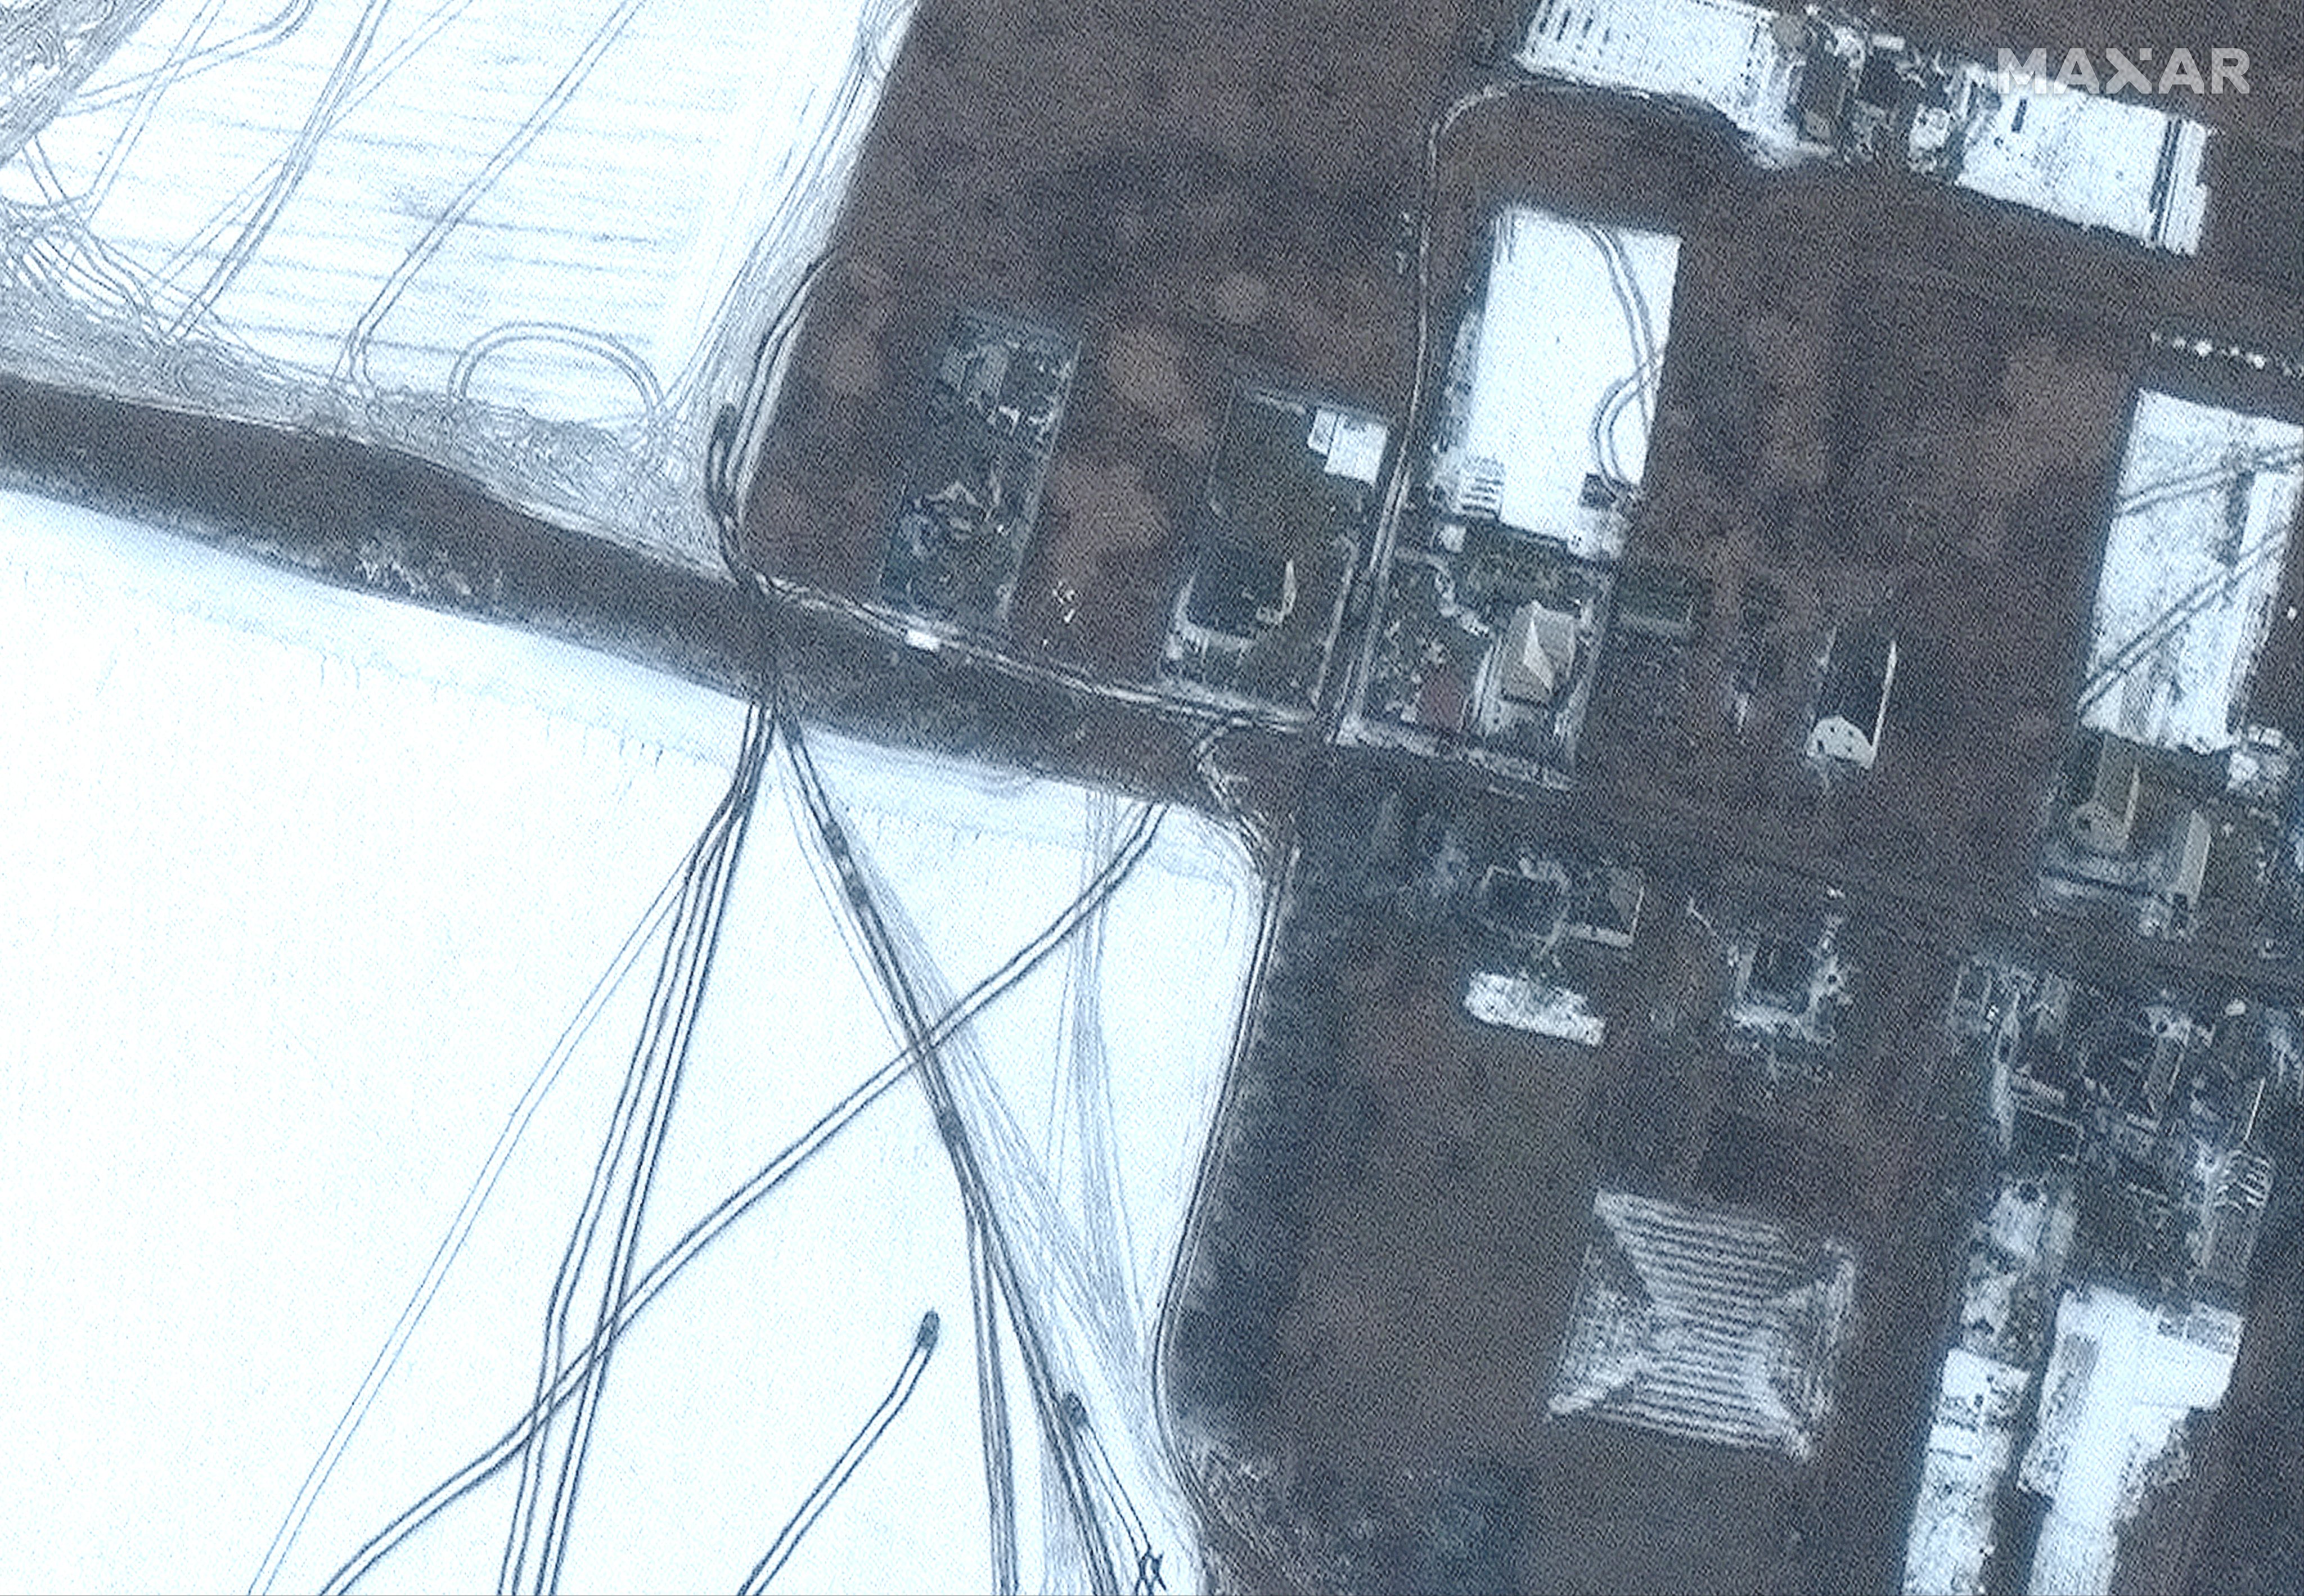 RUSSIANS INVADE UKRAINE -- MARCH 8, 2022:  02 Maxar satellite imagery, closer view of armored vehicles moving northeast of Antonov Airport outside of Hostomel, Ukraine.  8march2022_wv3.  Please use: Satellite image (c) 2022 Maxar Technologies.